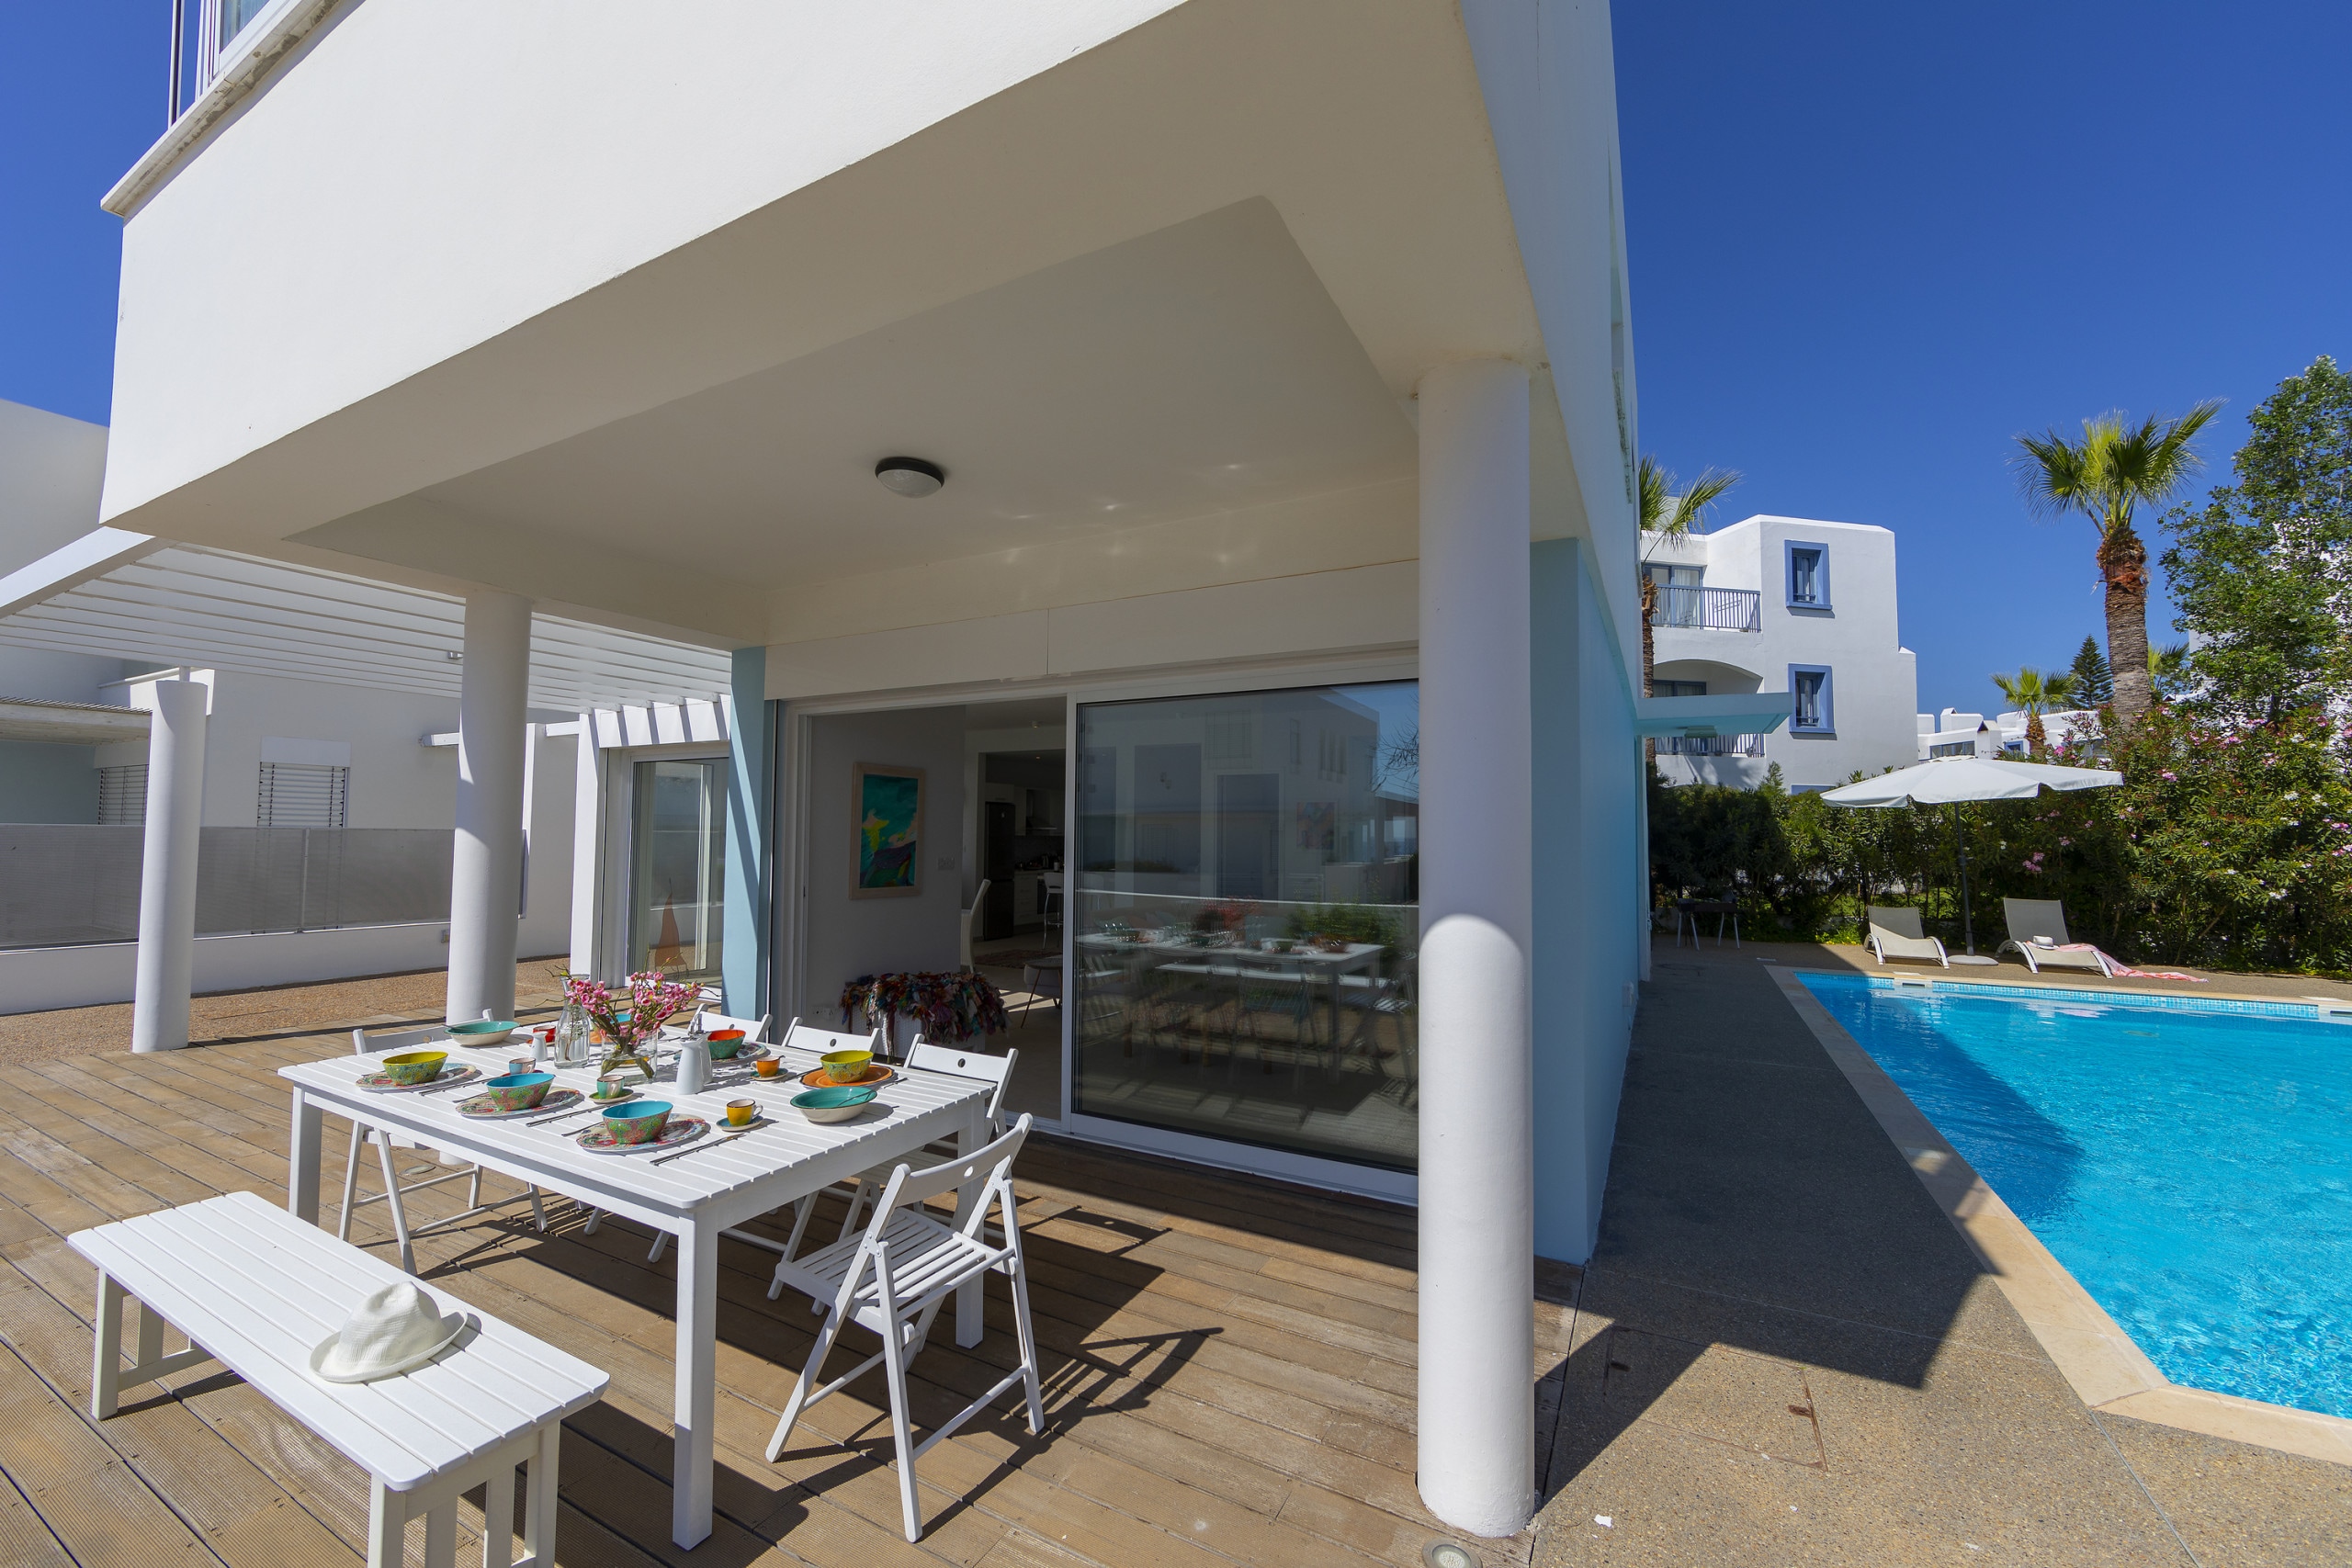 Property Image 2 - Upscale Vacation Villa with Big Pool near Fig Tree Bay